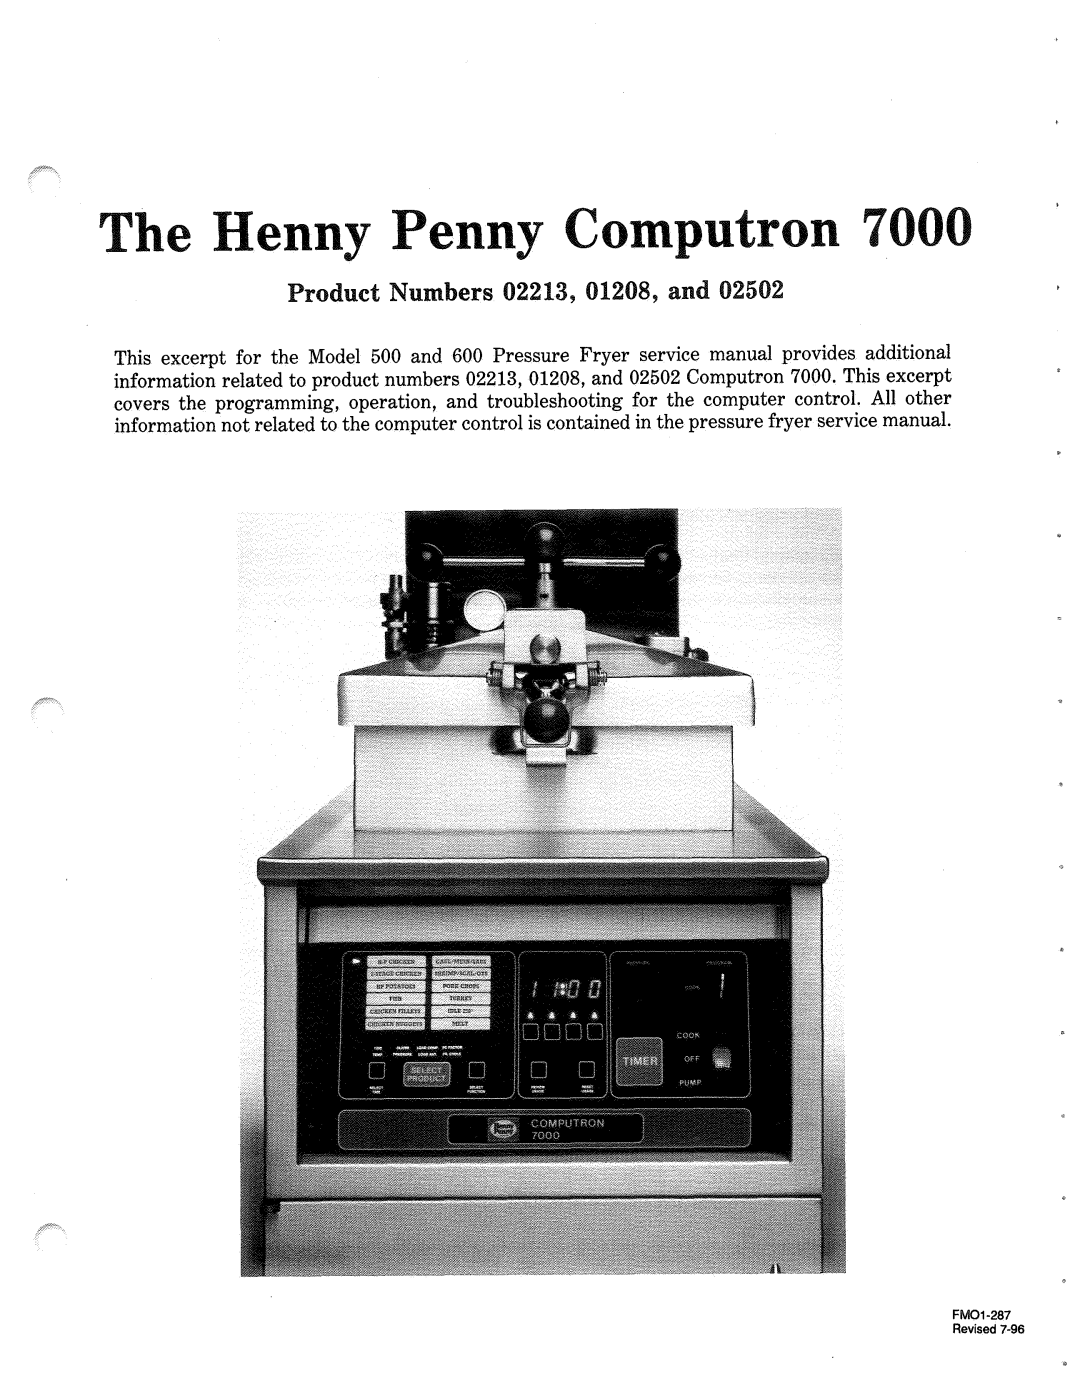 Henny Penny 7000 manual Revised 